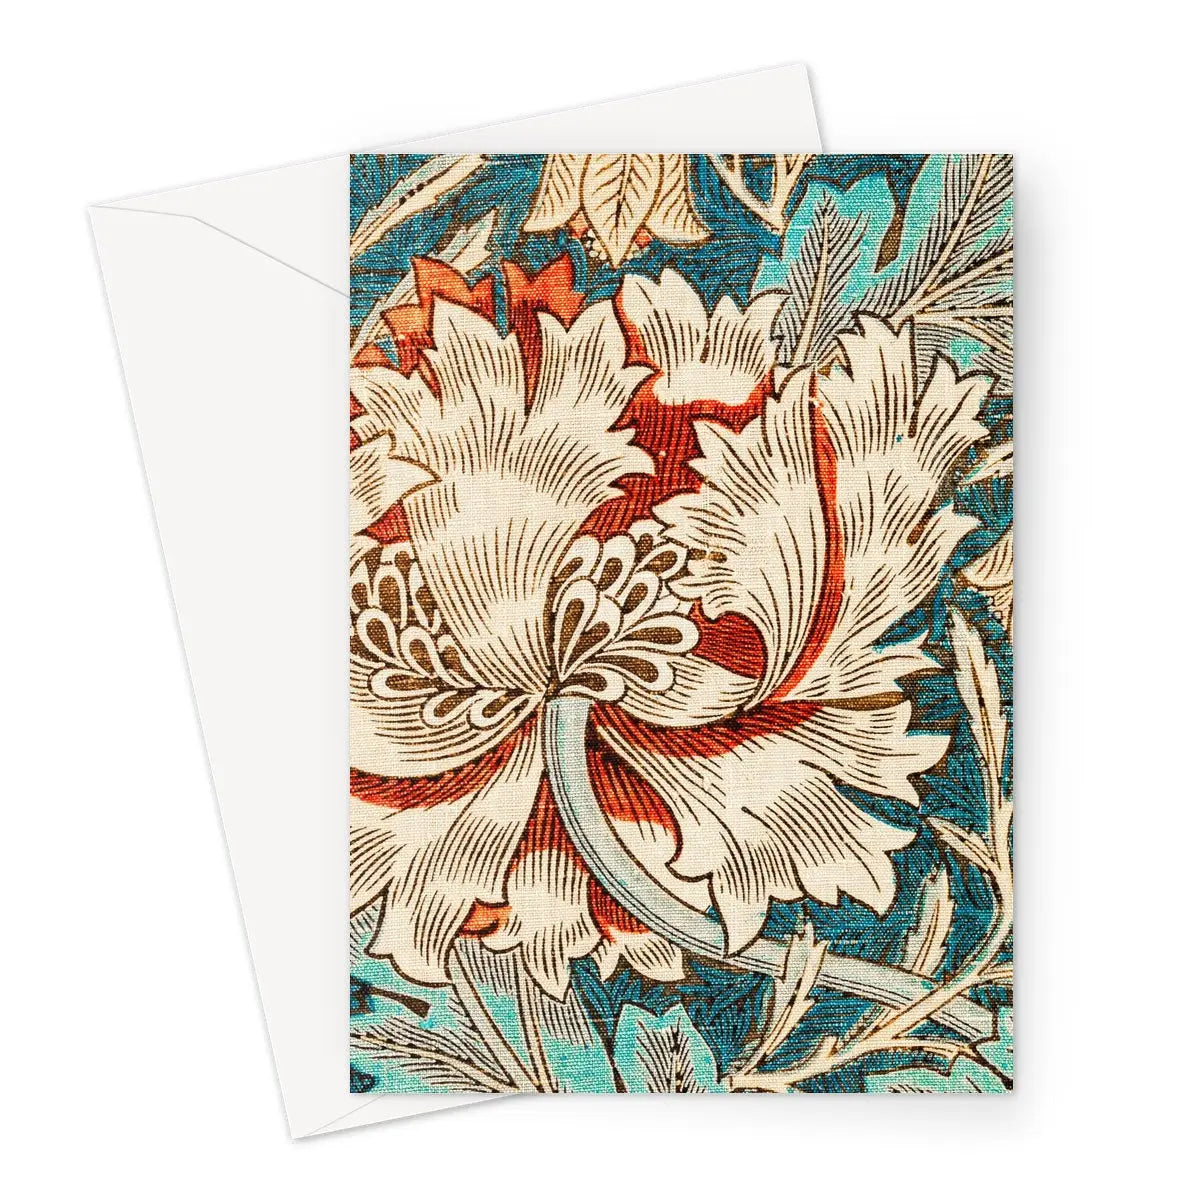 Honeysuckle Too - William Morris Arts & Crafts Greeting Card - A5 Portrait / 1 Card - Greeting & Note Cards - Aesthetic